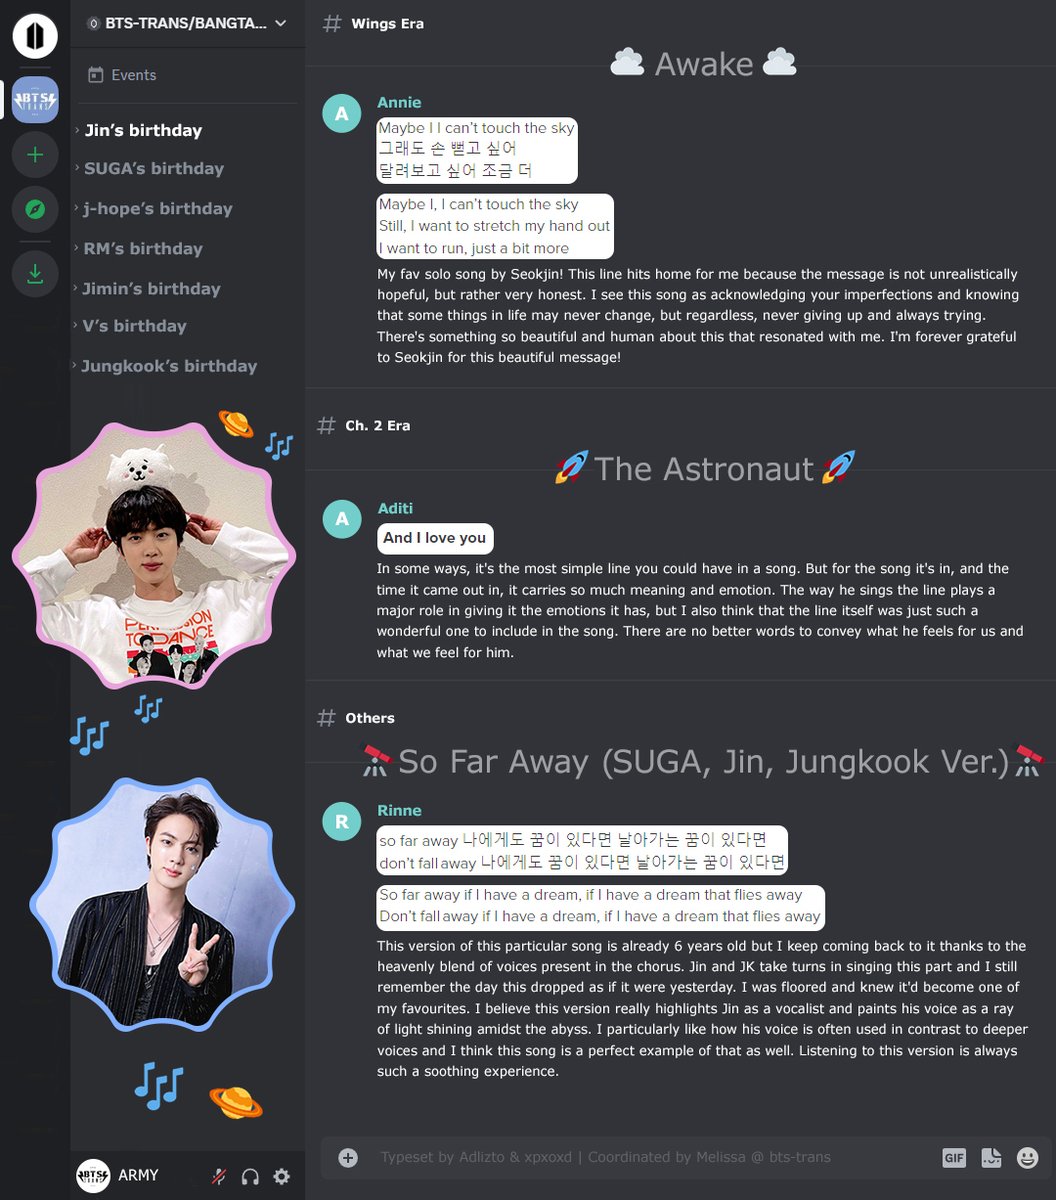 This year, we would like to celebrate by sharing with you some of our personal connections with BTS' music! Jin always sings with intense emotion and angelic vocals. Not one to shy away from his honest thoughts with ARMY, the team at @BTS_Trans explains some of our favorite…